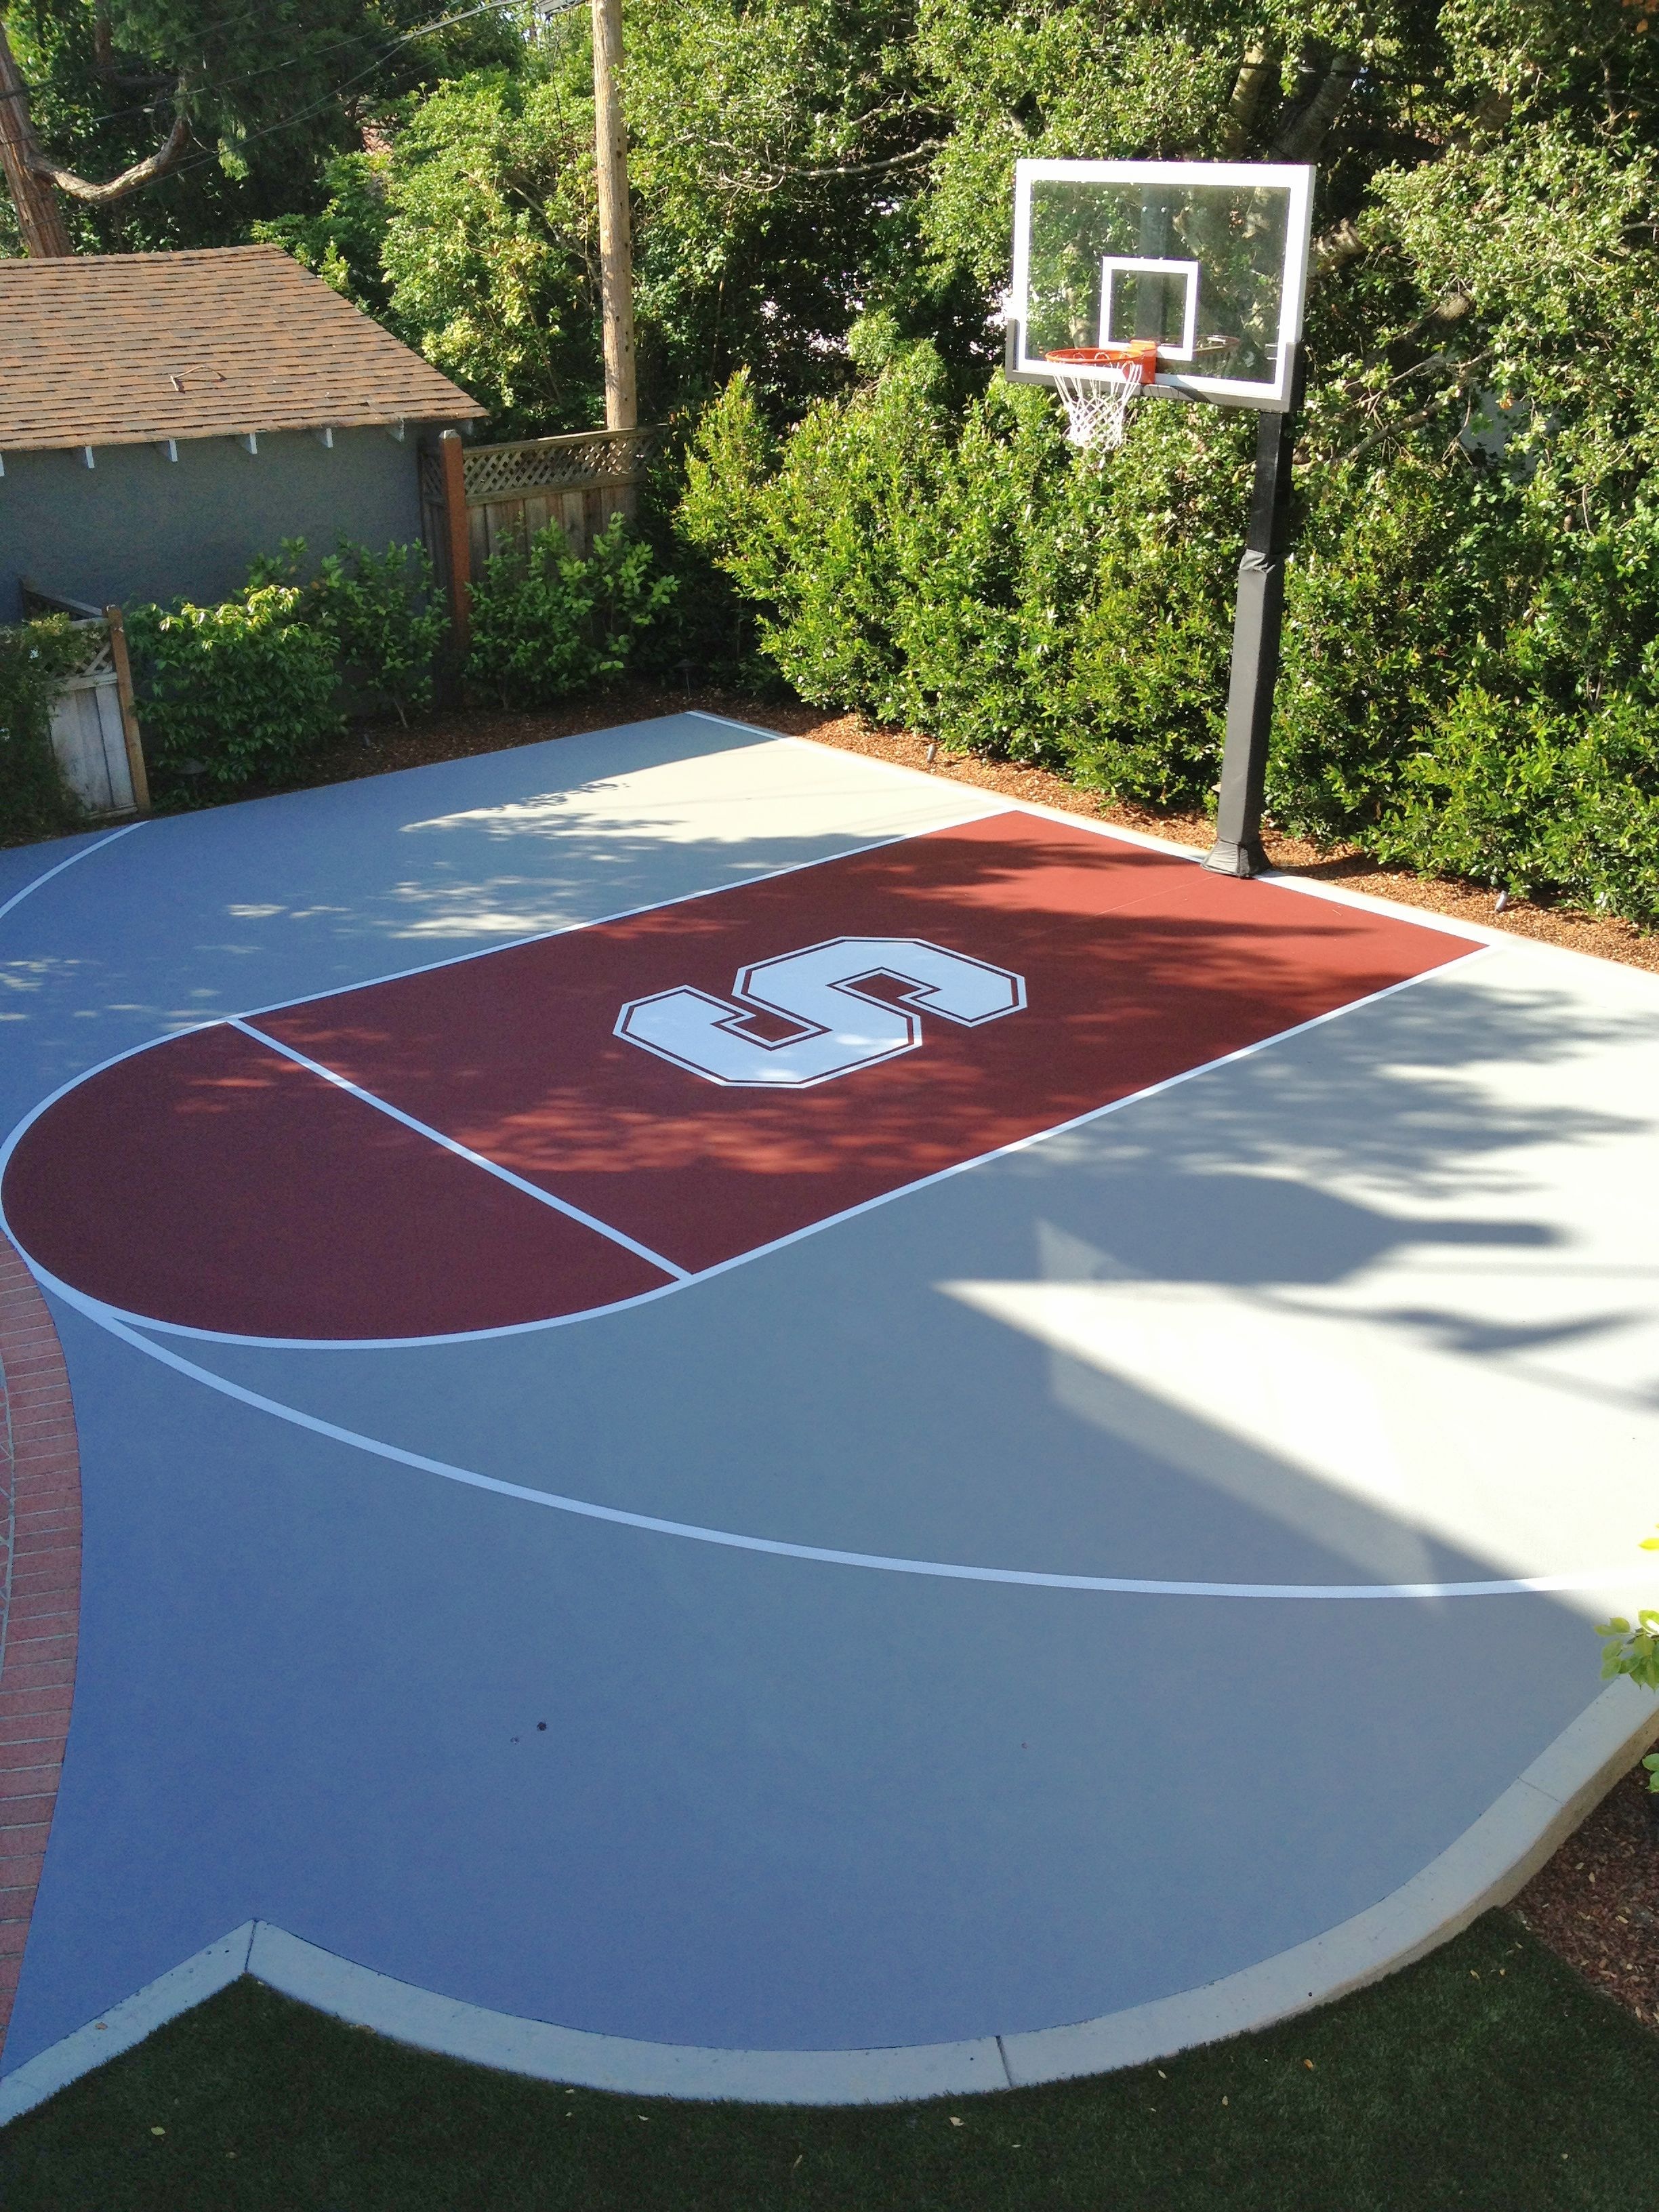 Mark has created a great Stanford half-court in his backyard complete with logo and Hercules Platinum basketball system.